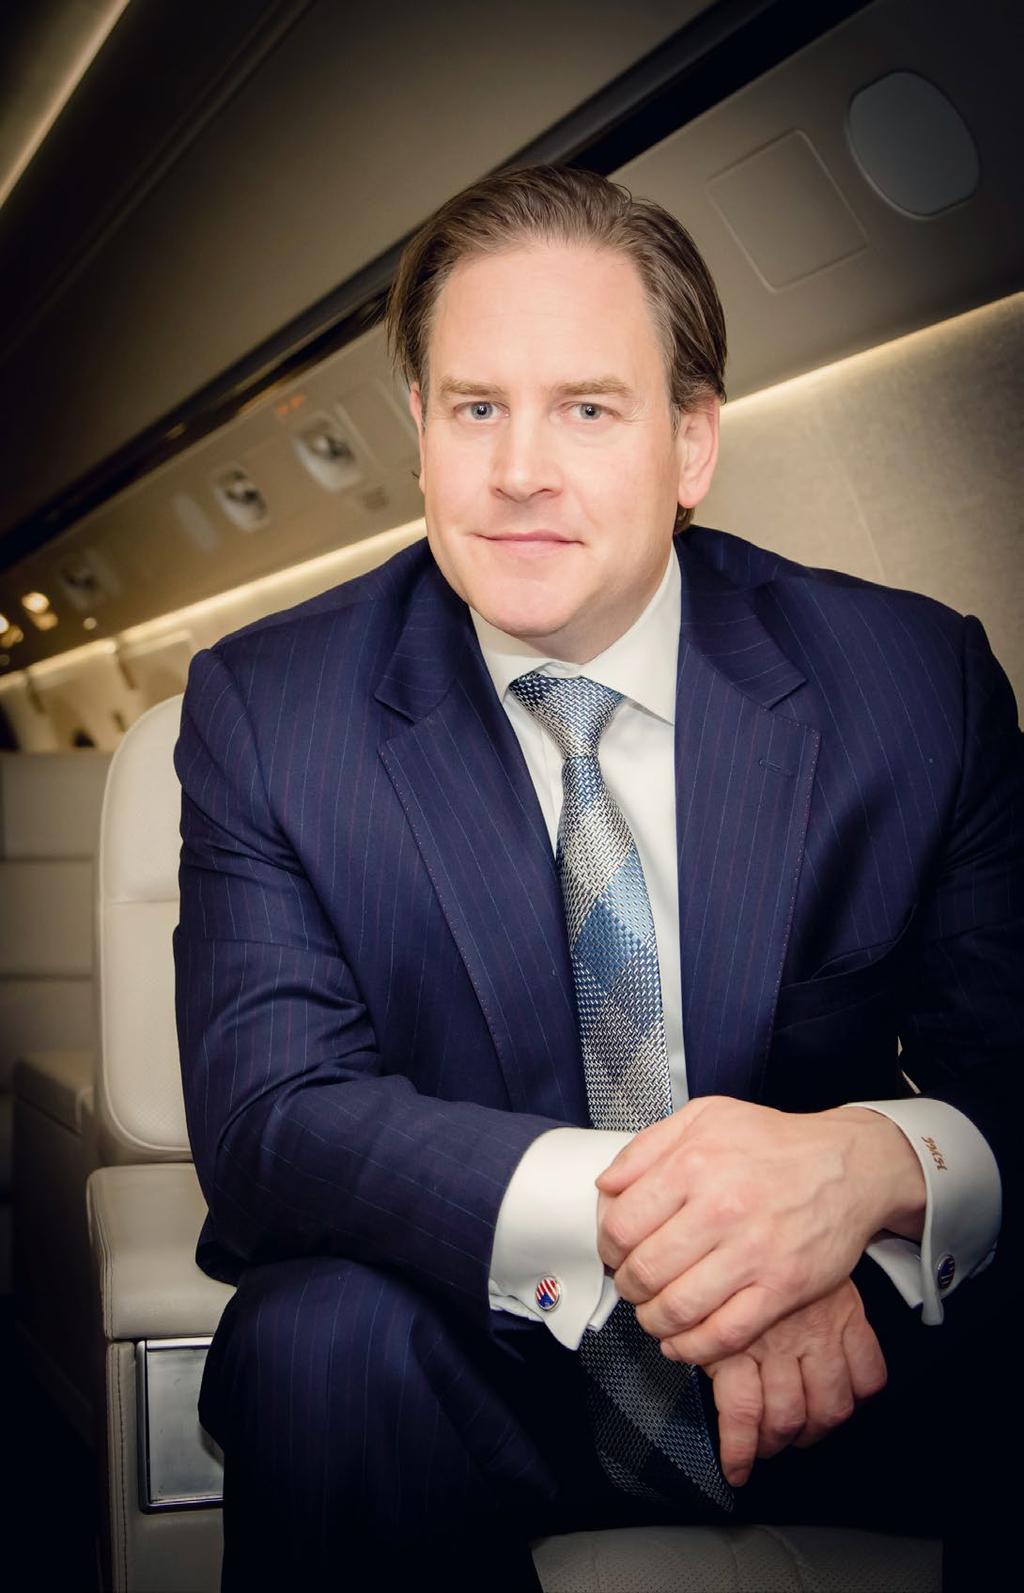 About Joshua Hebert Joshua Hebert founded Magellan Jets in 2008 after 15 years of experience in finance, marketing, and aviation.